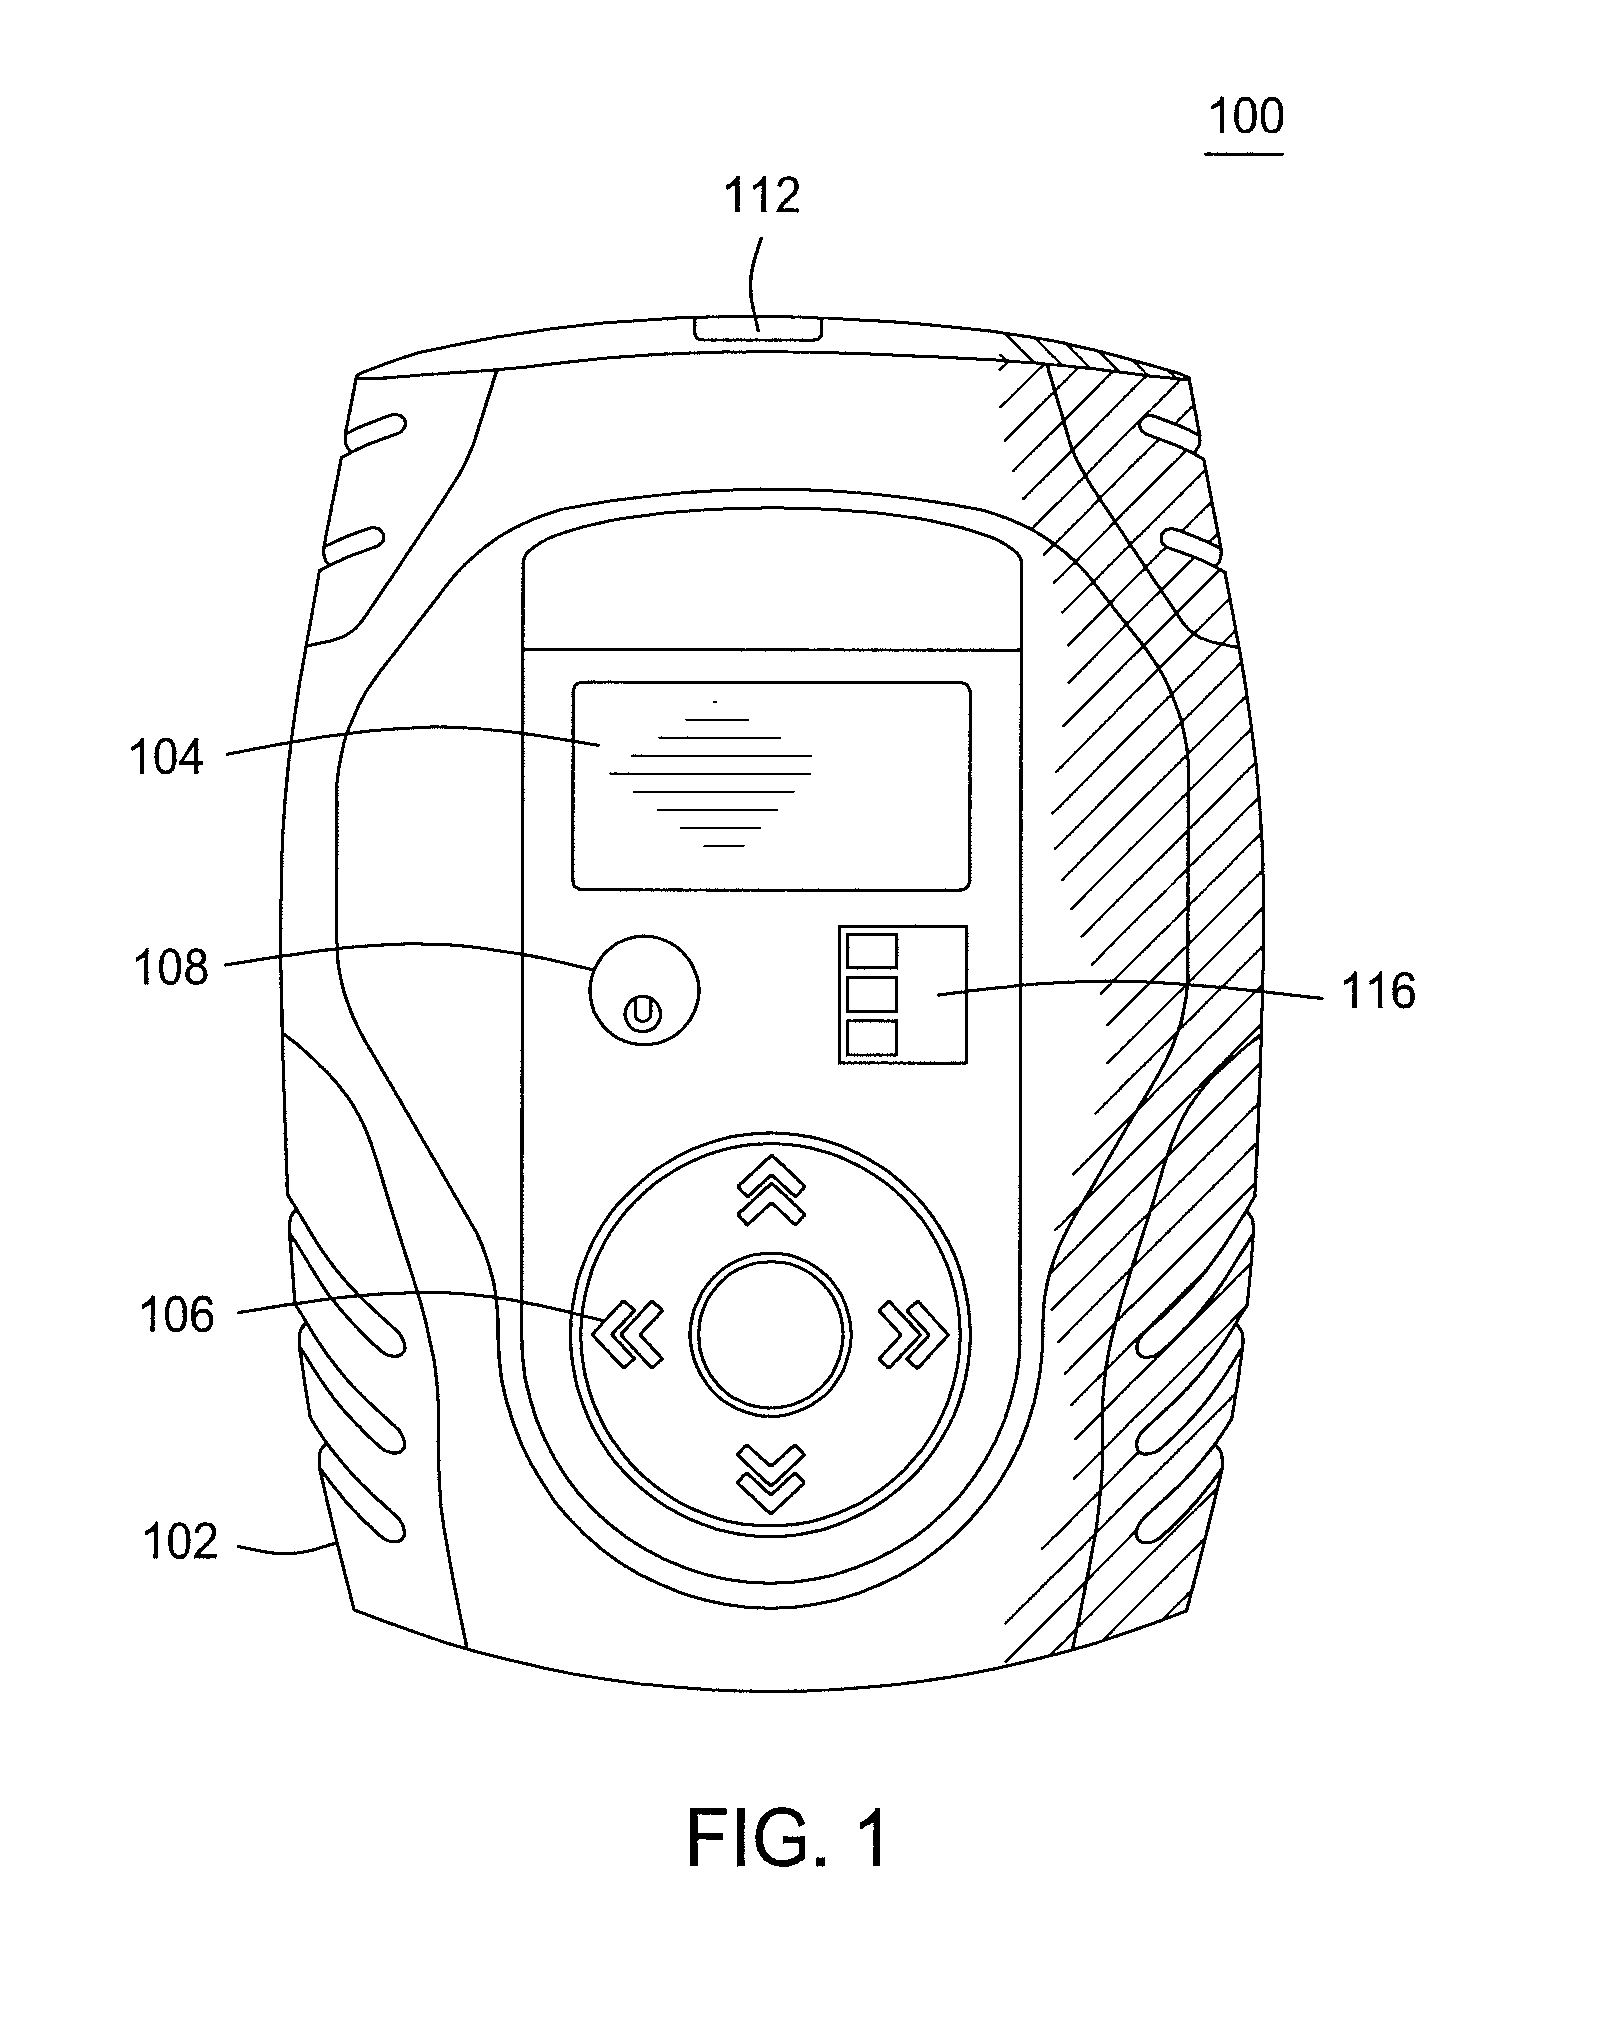 Vehicle Diagnostic, Communication and Signal Delivery System